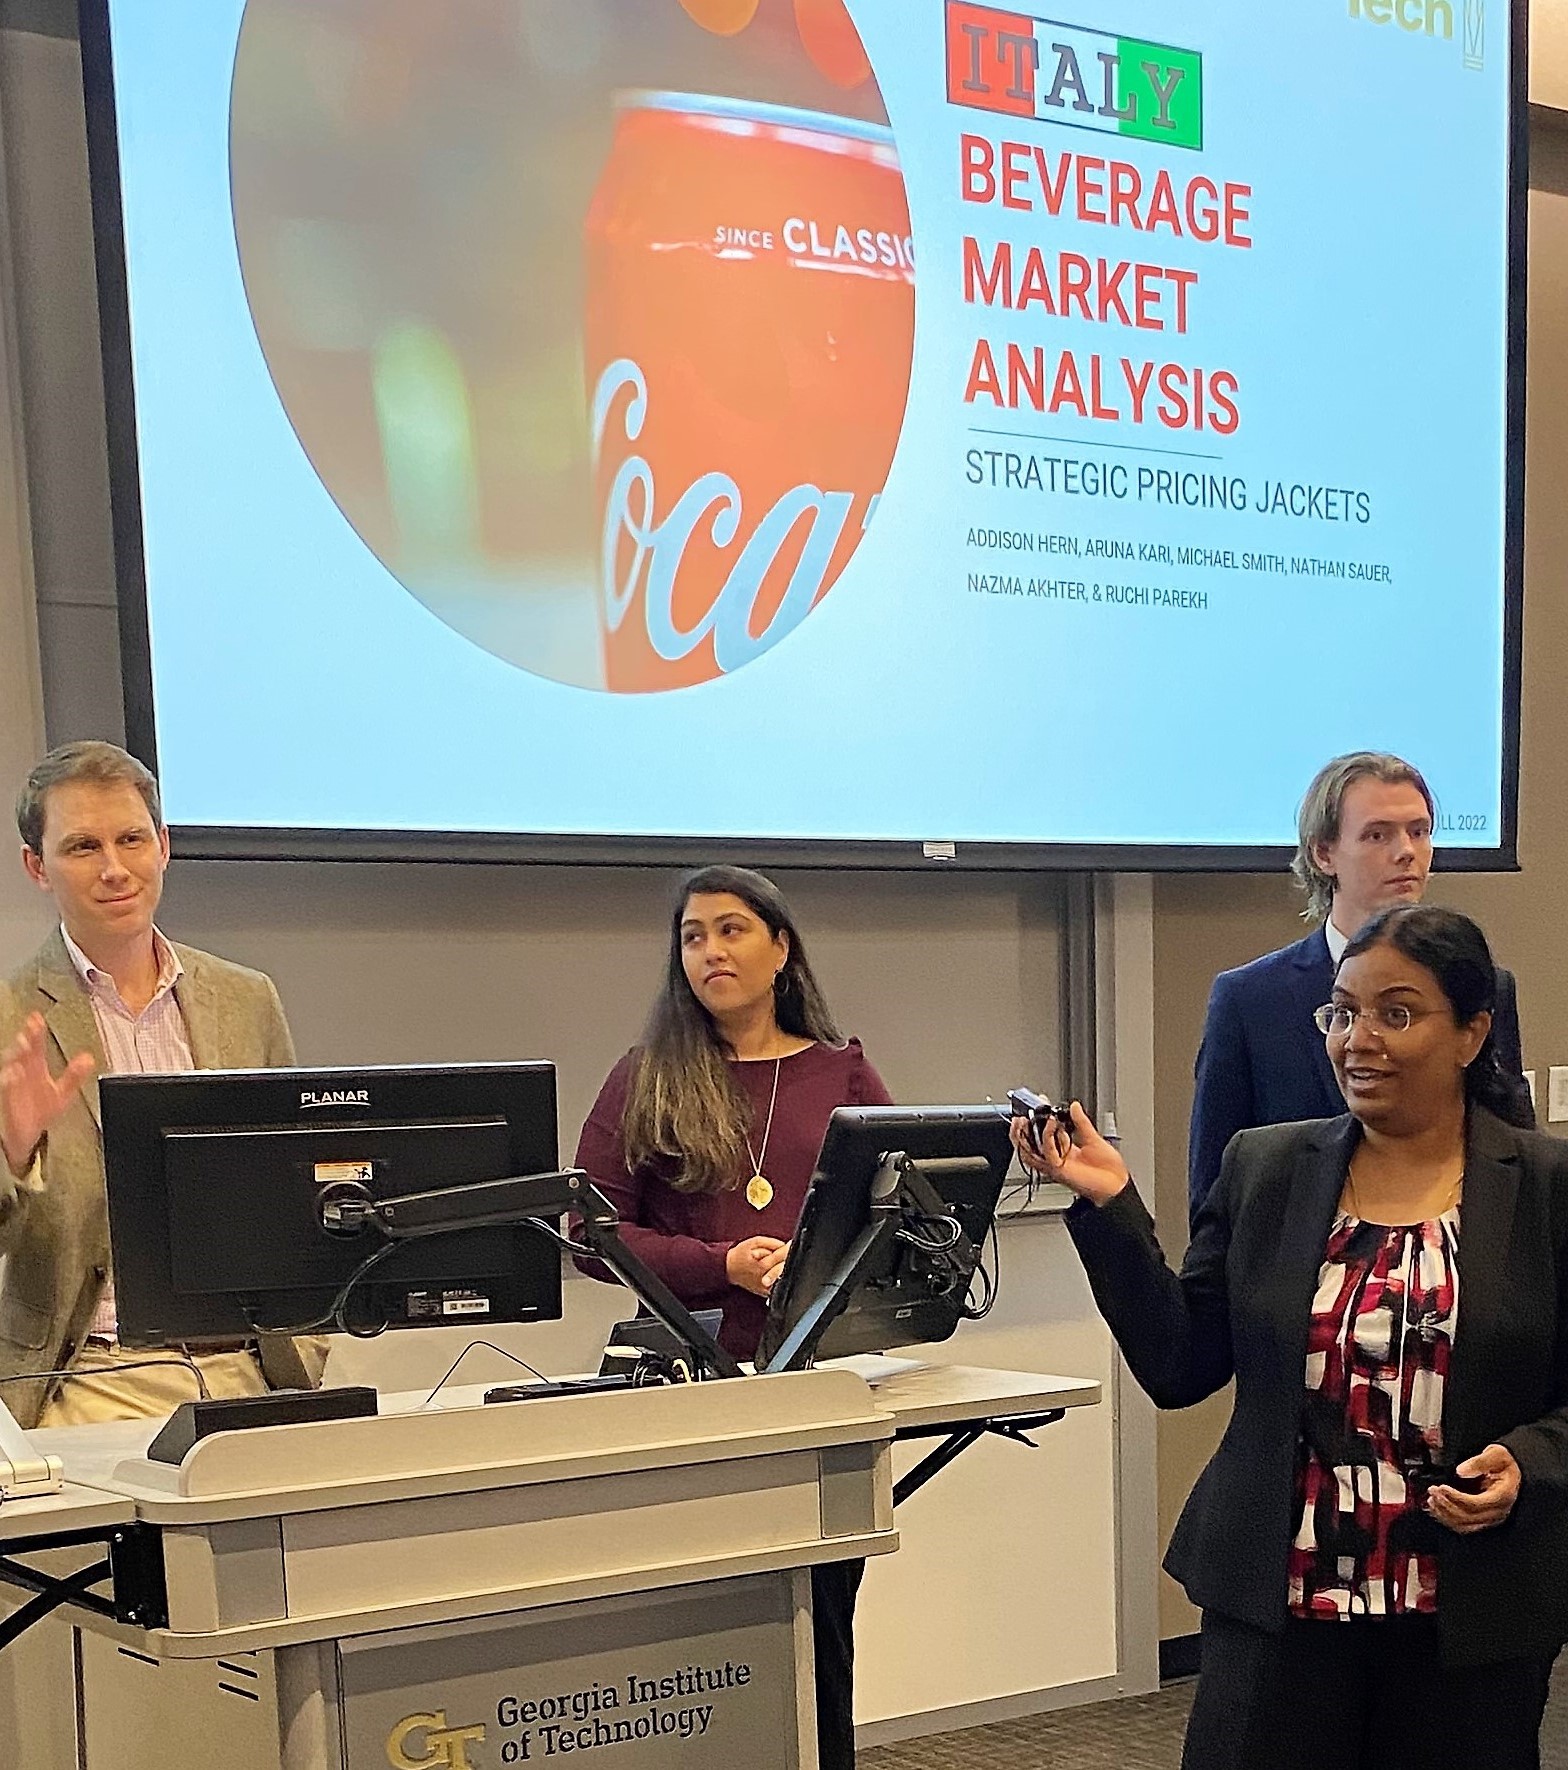 Evening MBA student Aruna Kari explains how alternate pricing strategies could aid Coke beverage sales in Italy.